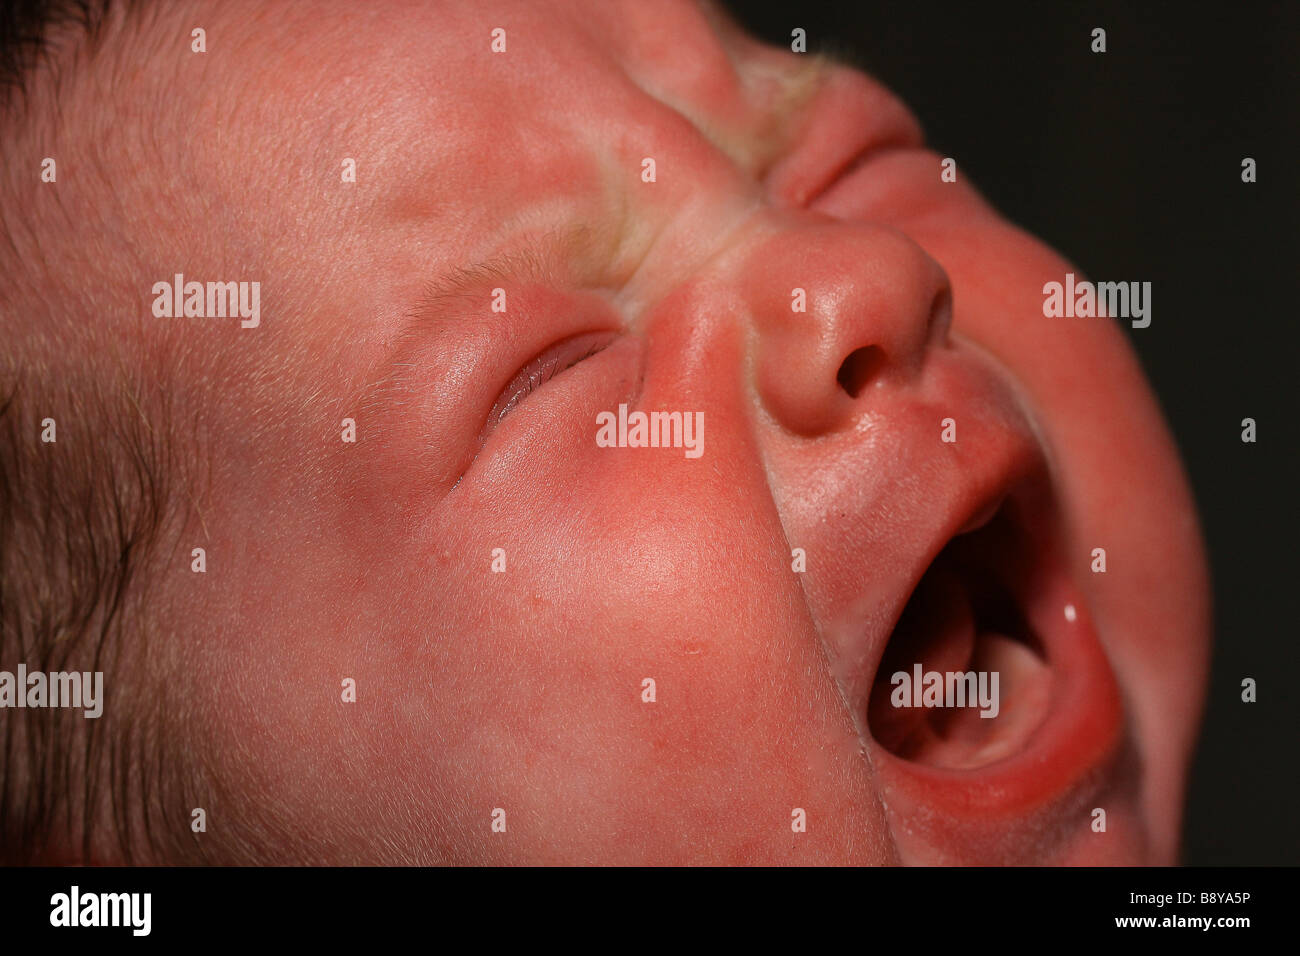 A crying three week old baby girl Stock Photo